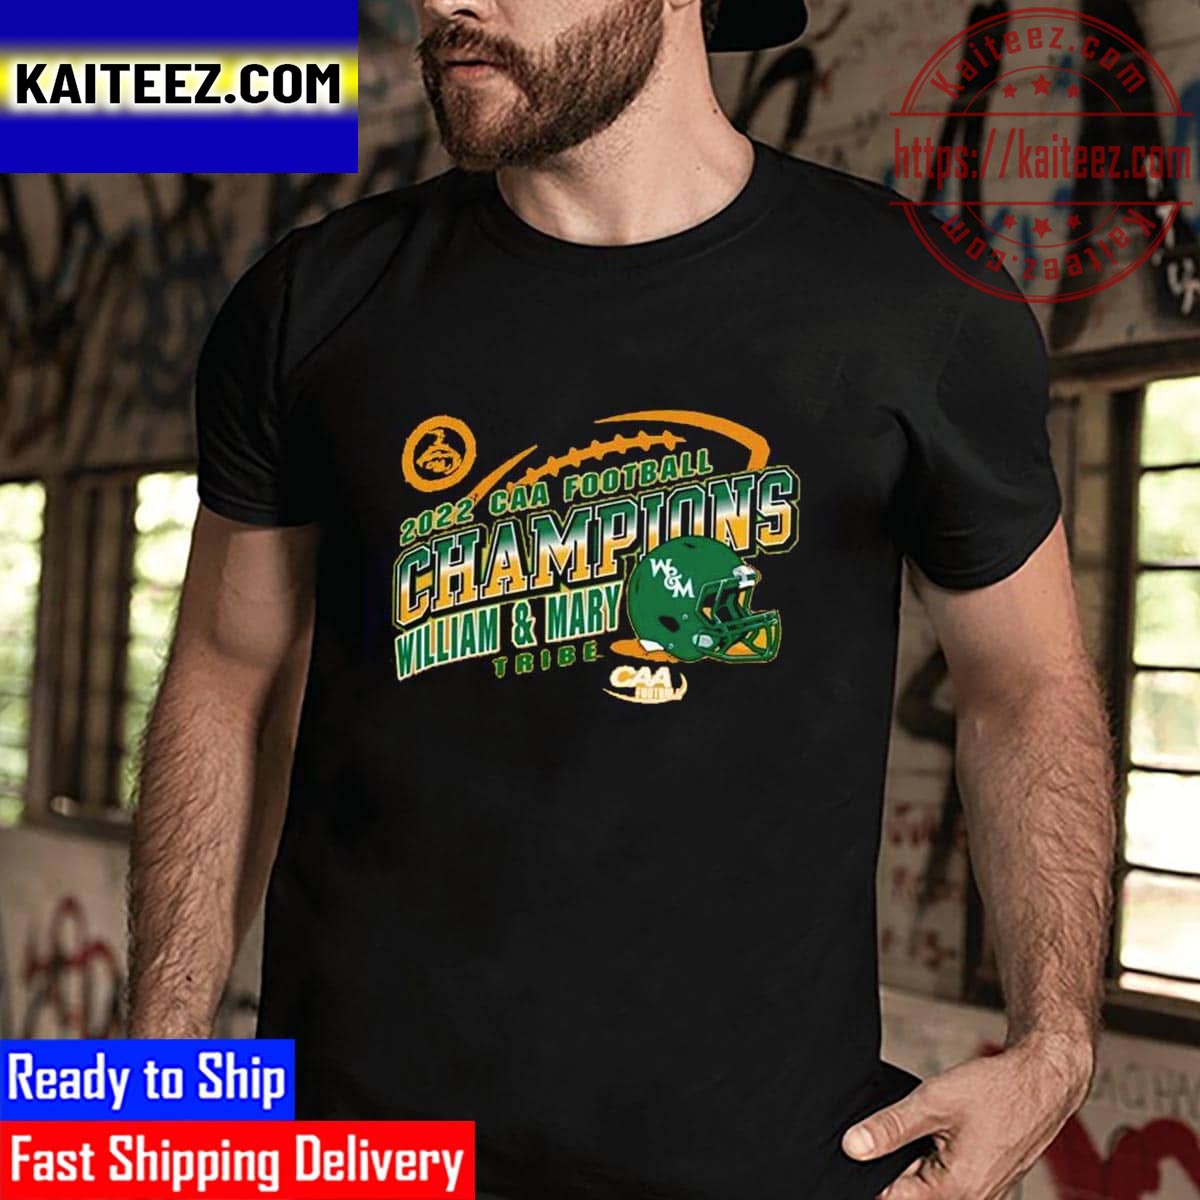 William And Mary Tribe 2022 NCAA Football Champions Vintage T-Shirt ...